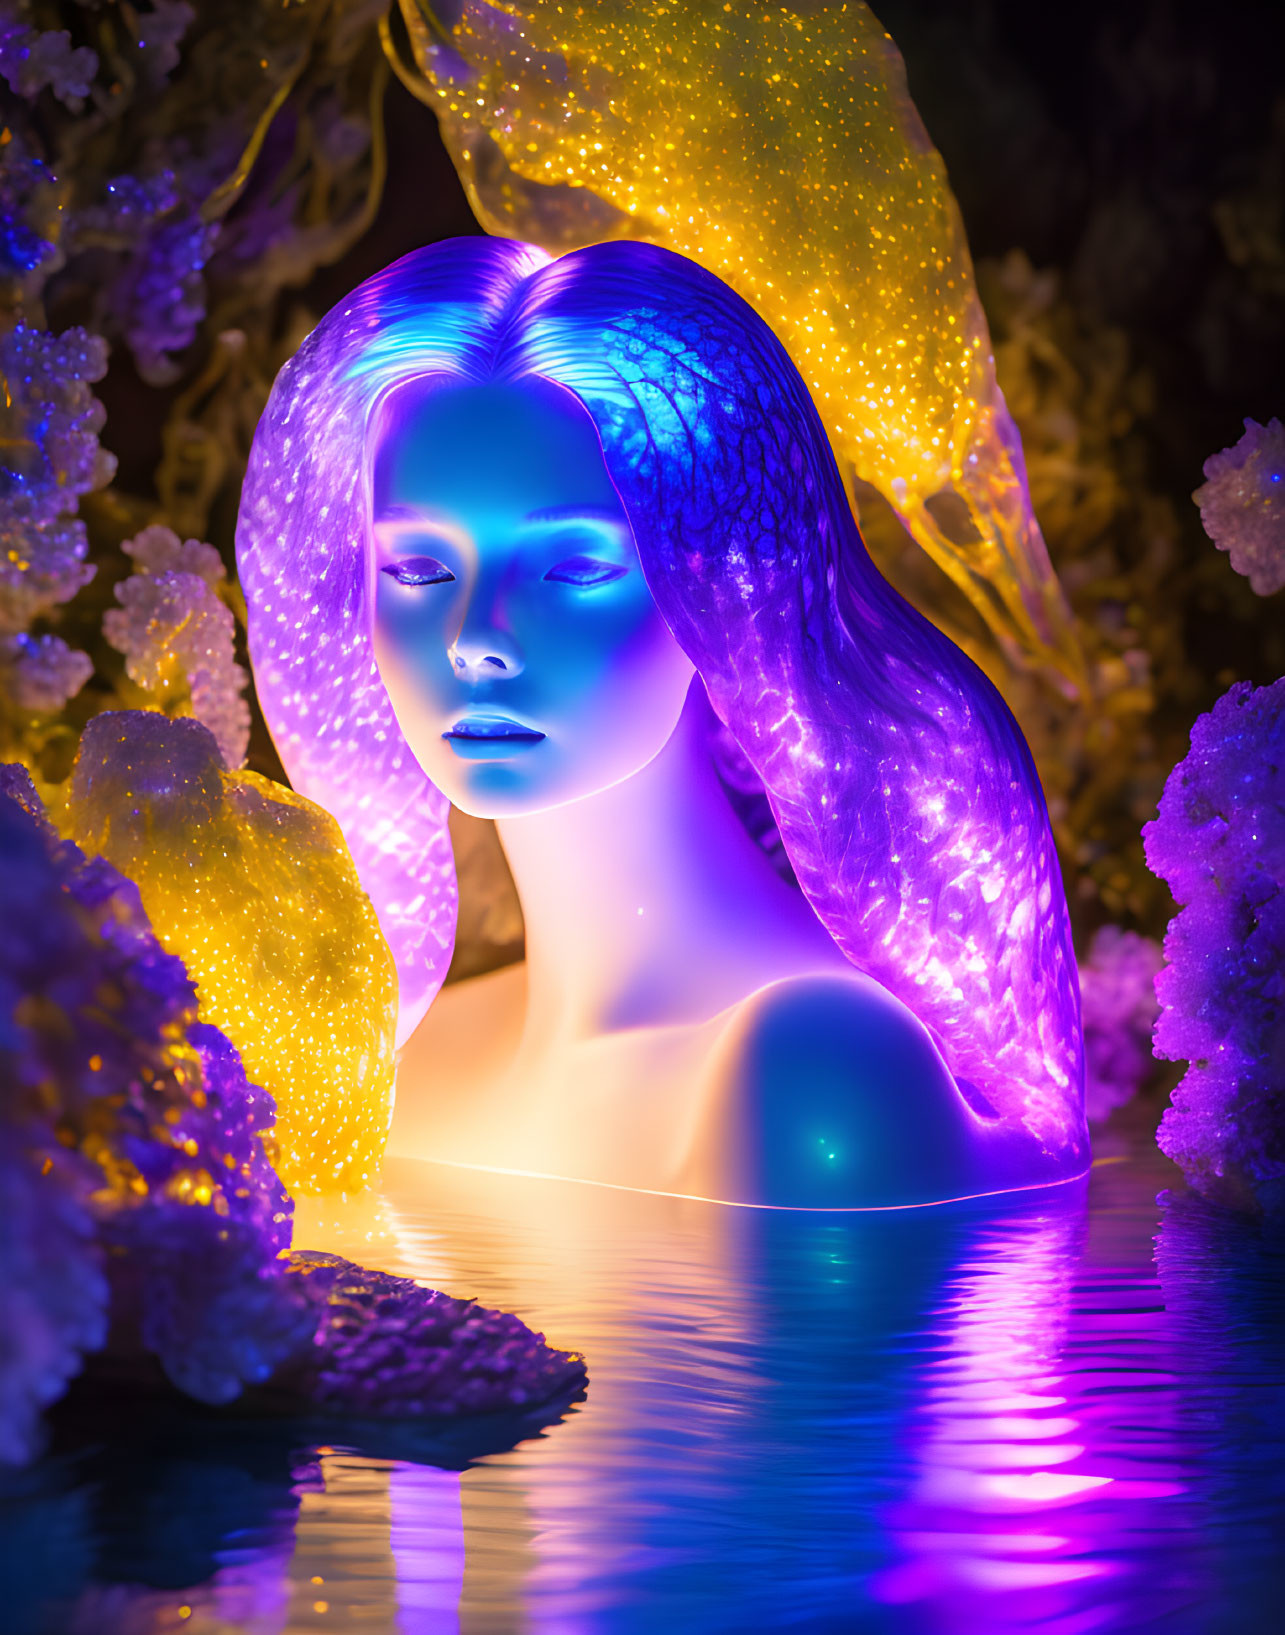 Surreal image: Female figure with glowing purple hair in vibrant, illuminated flora